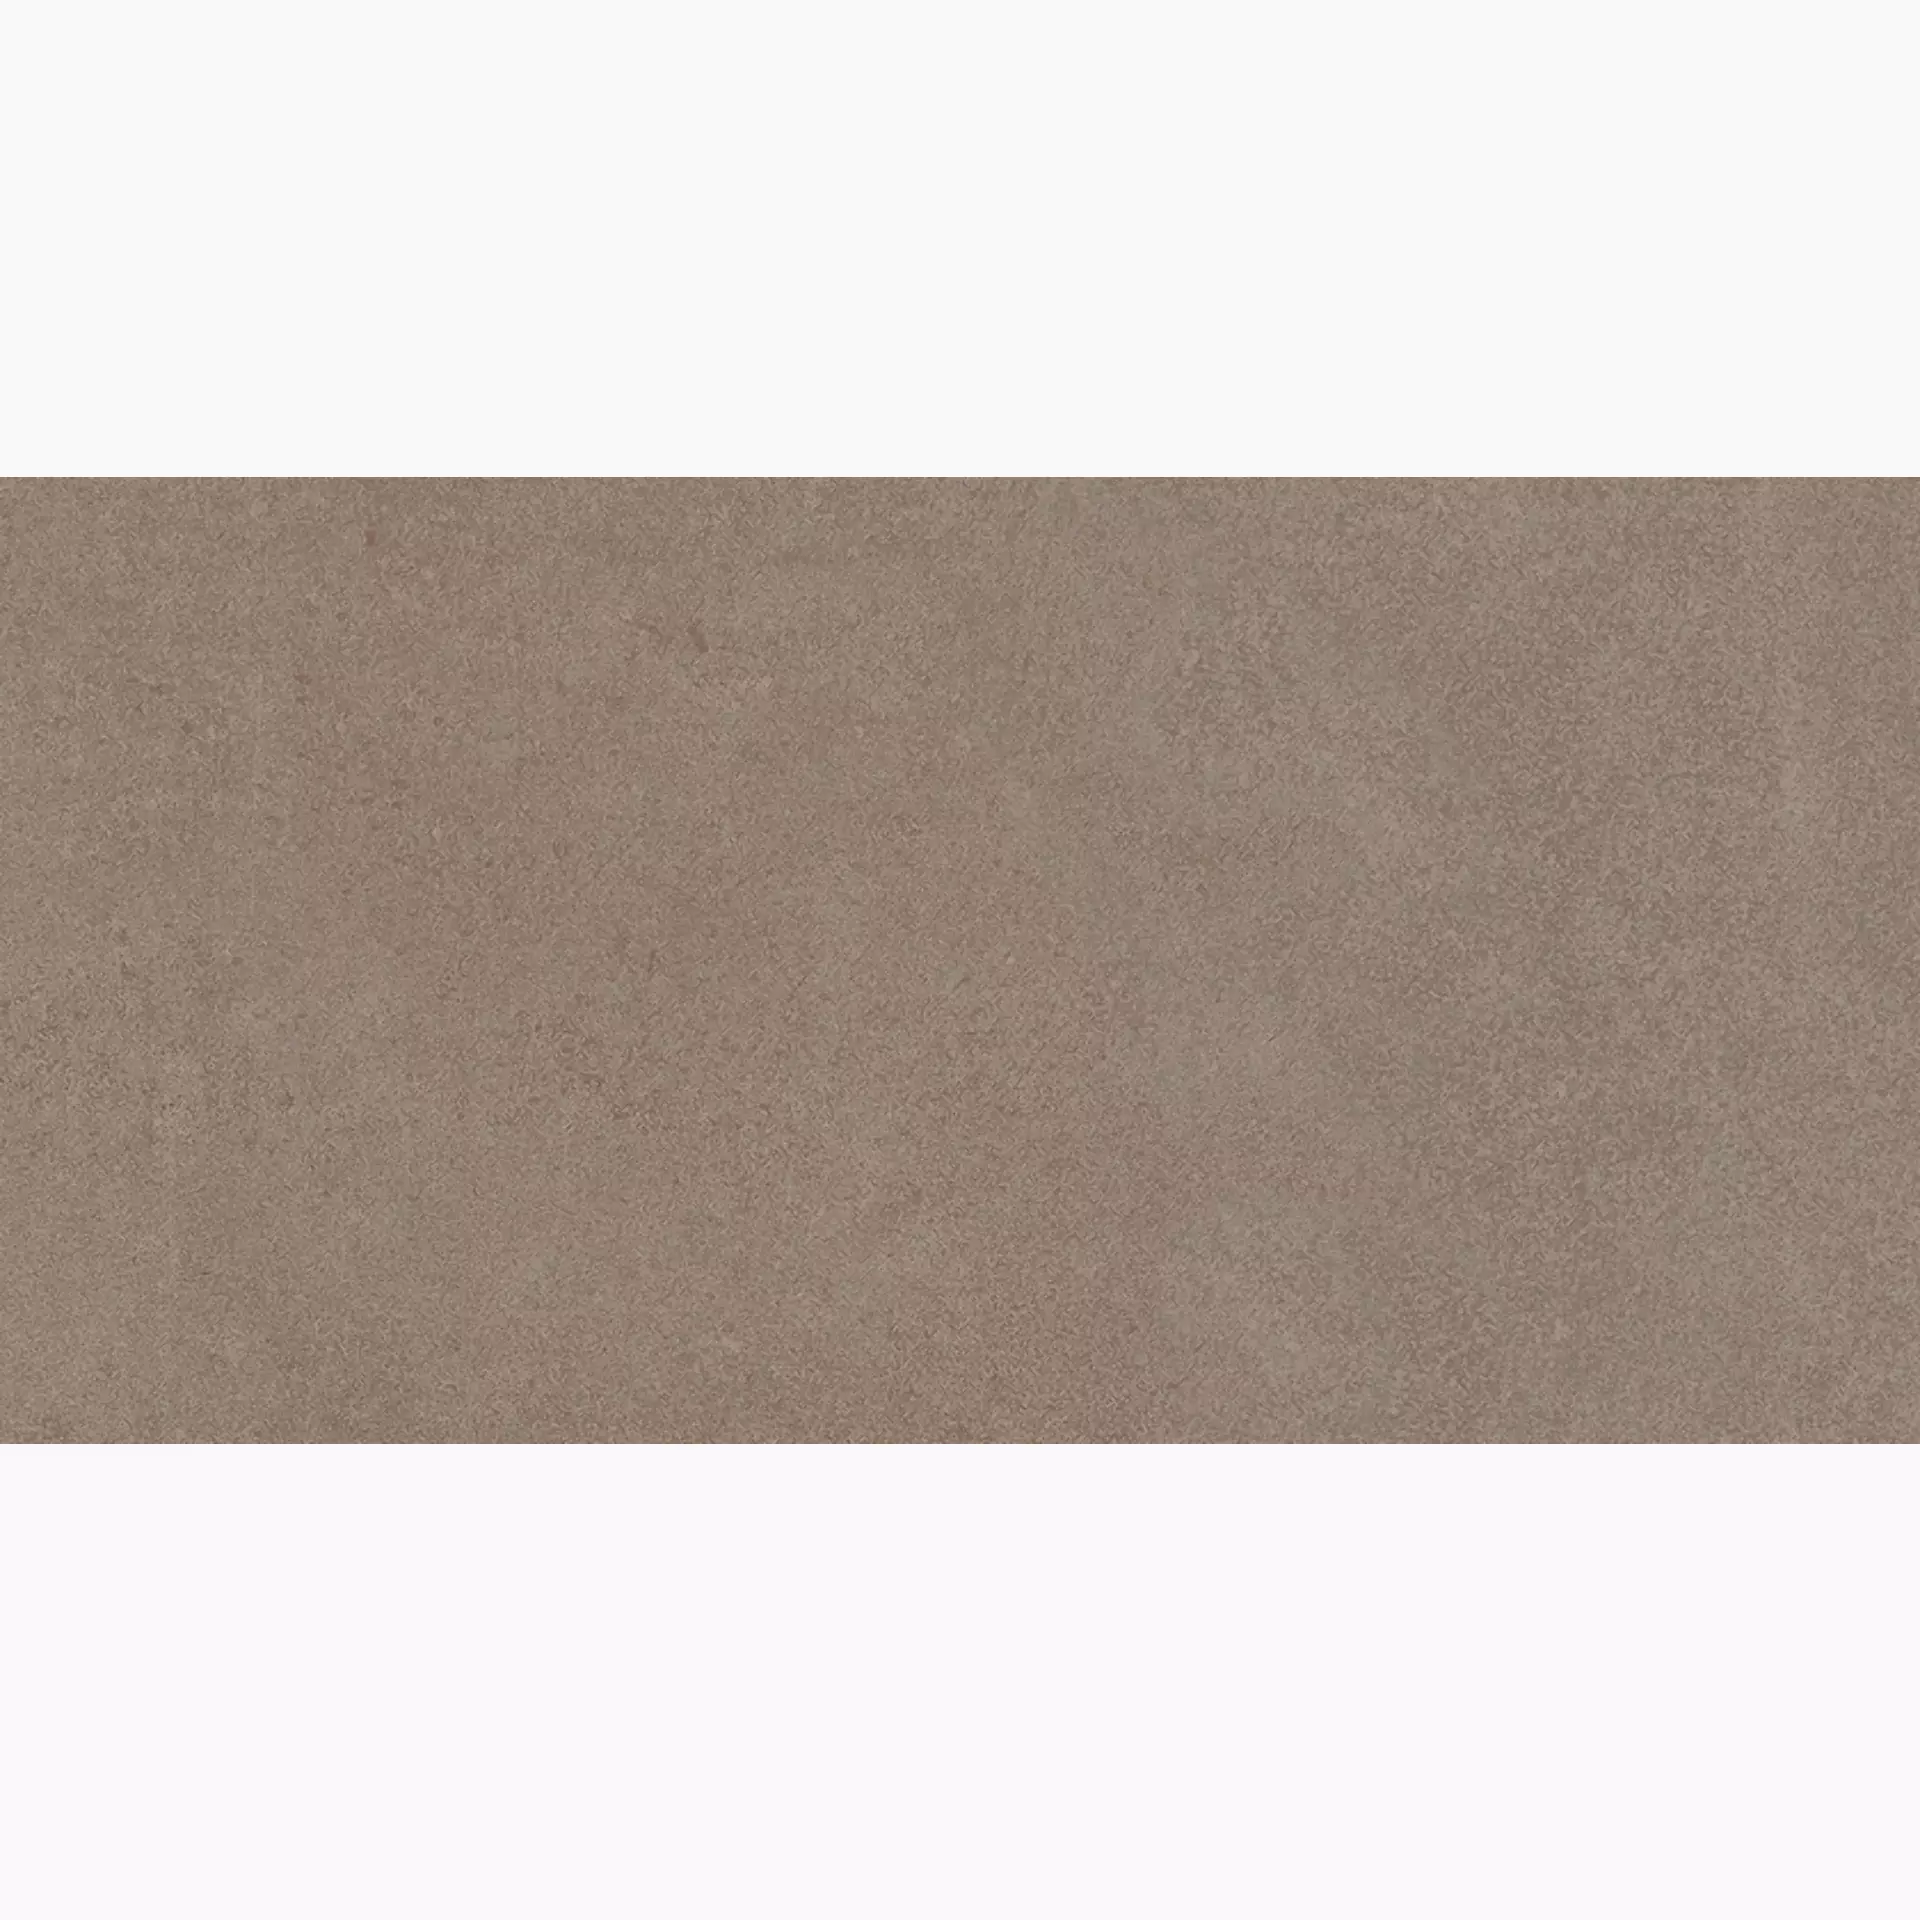 Mirage Glocal Gc 08 Chamois Naturale TO71 30x60cm rectified 9mm